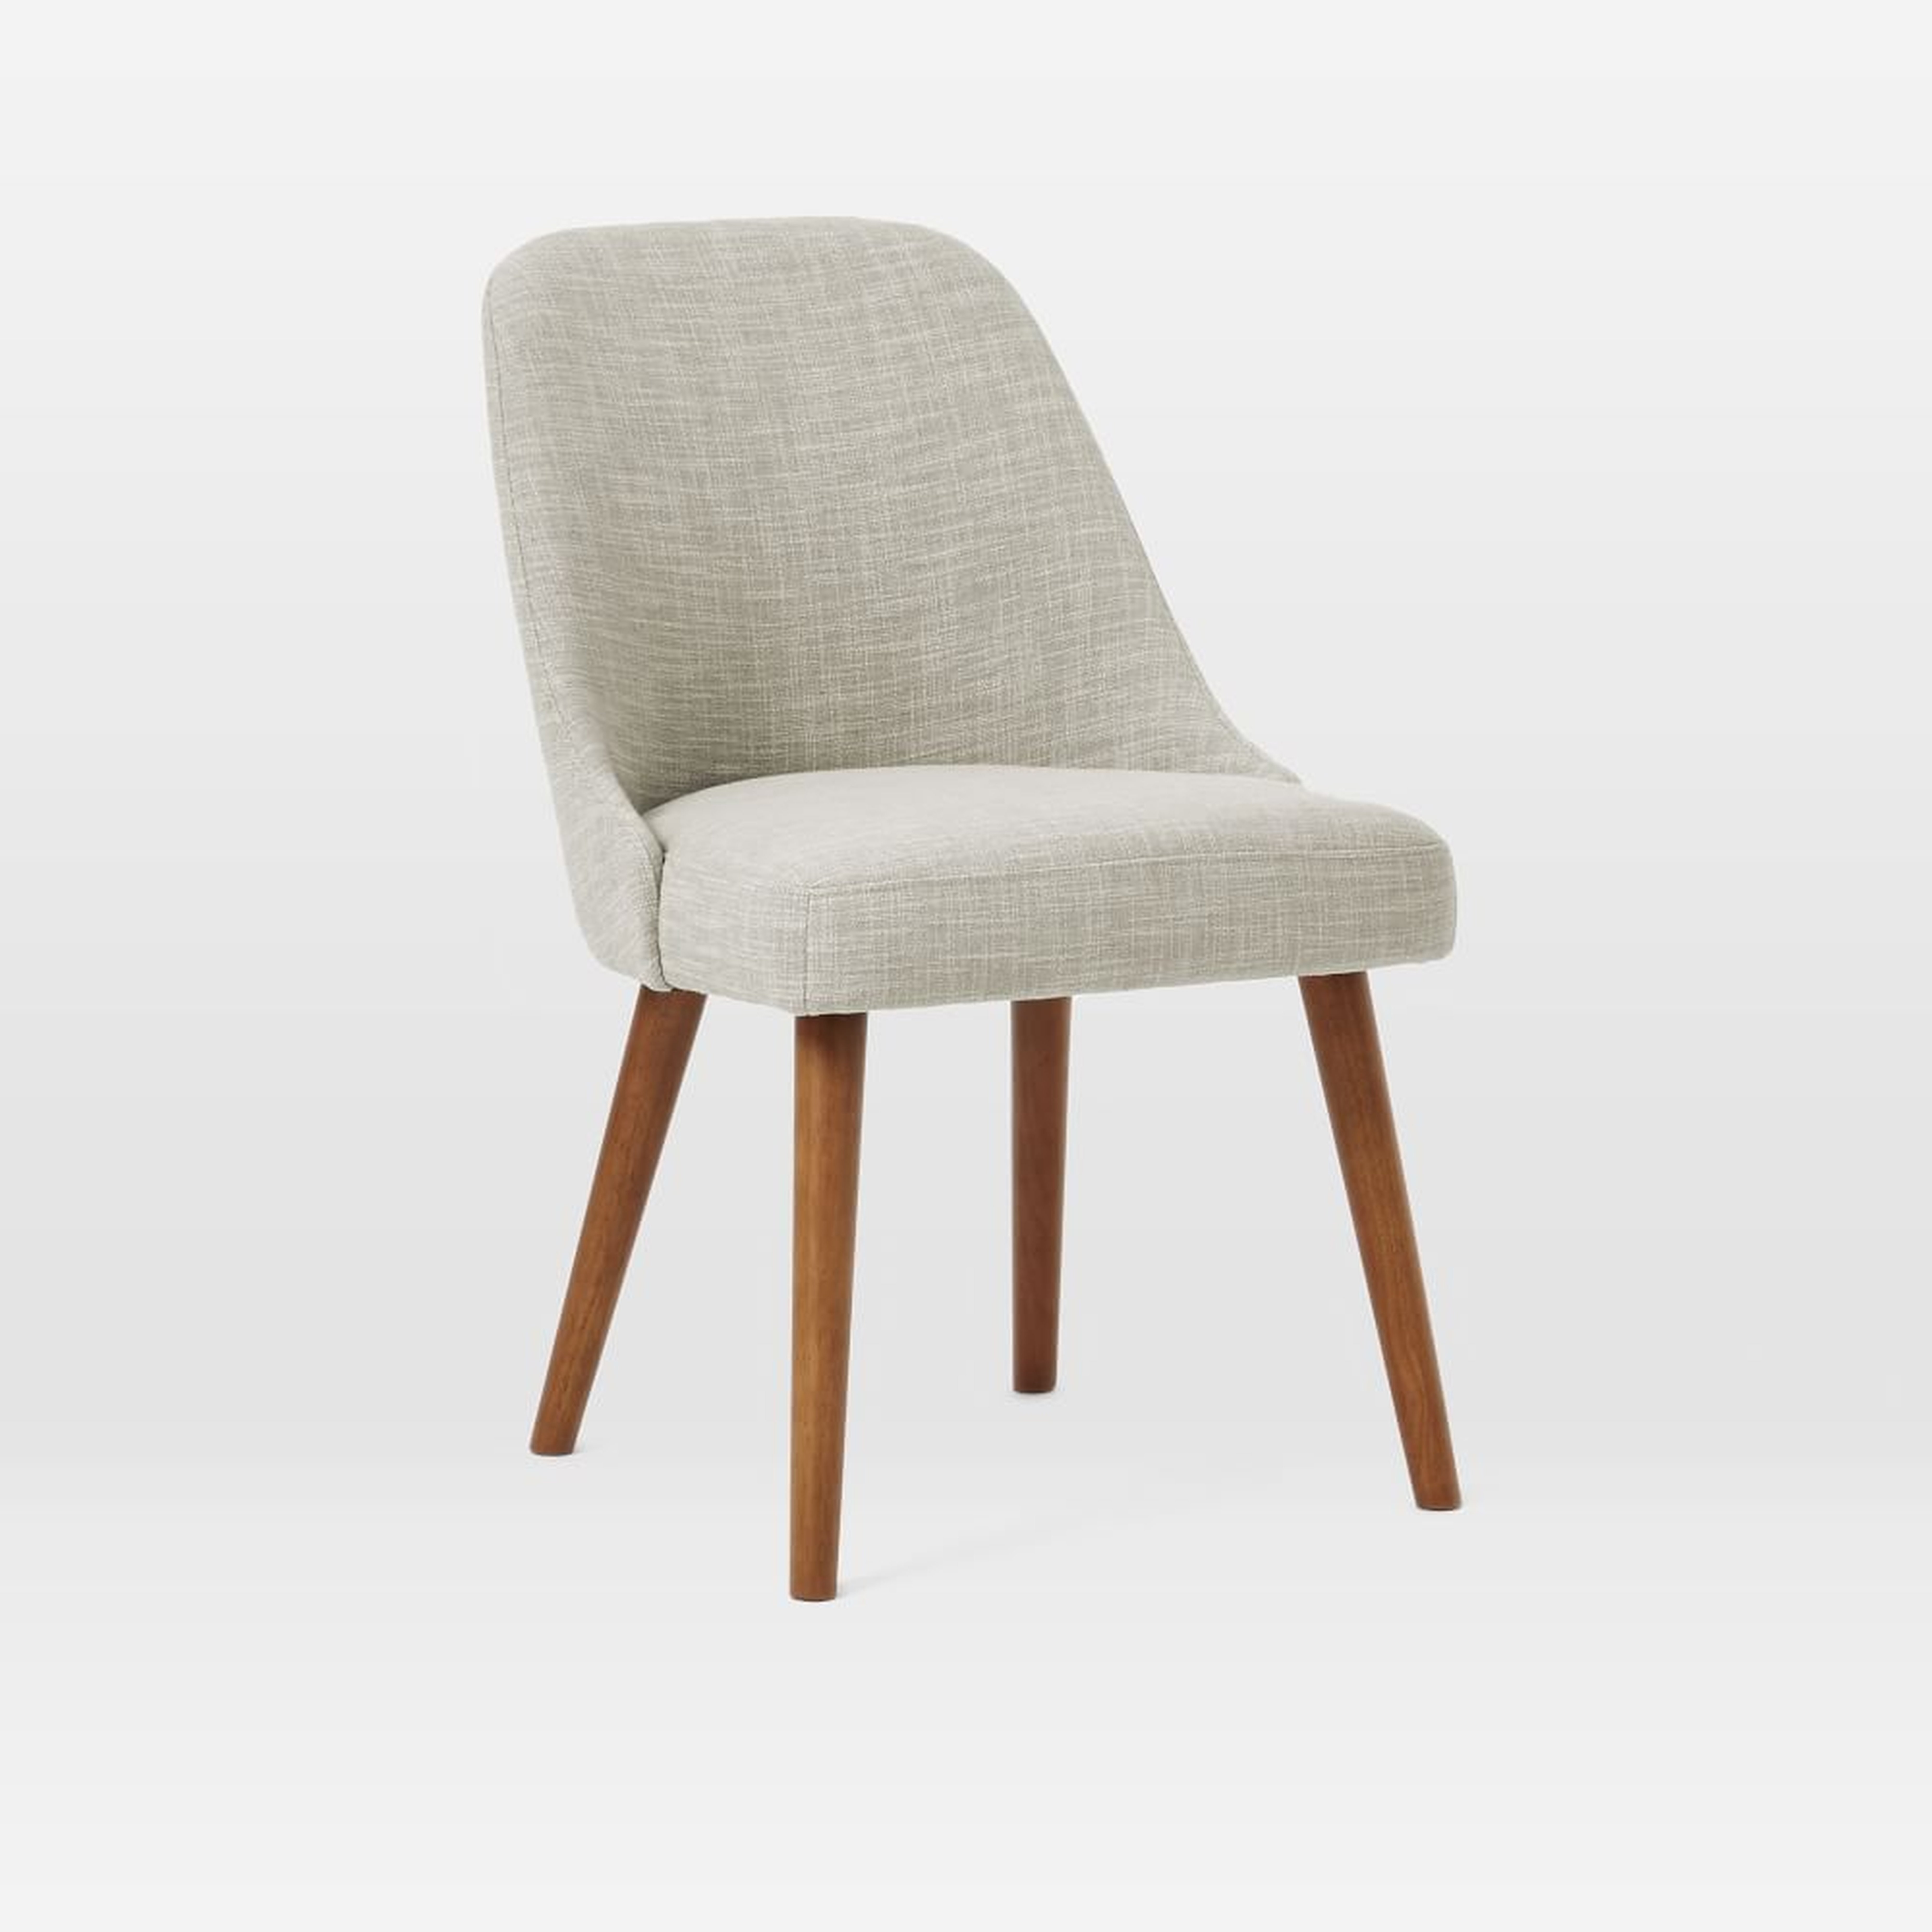 Mid Century Upholstered Dining Chair, Yarn Dyed Linen Weave, Pearl Gray, Pecan - West Elm